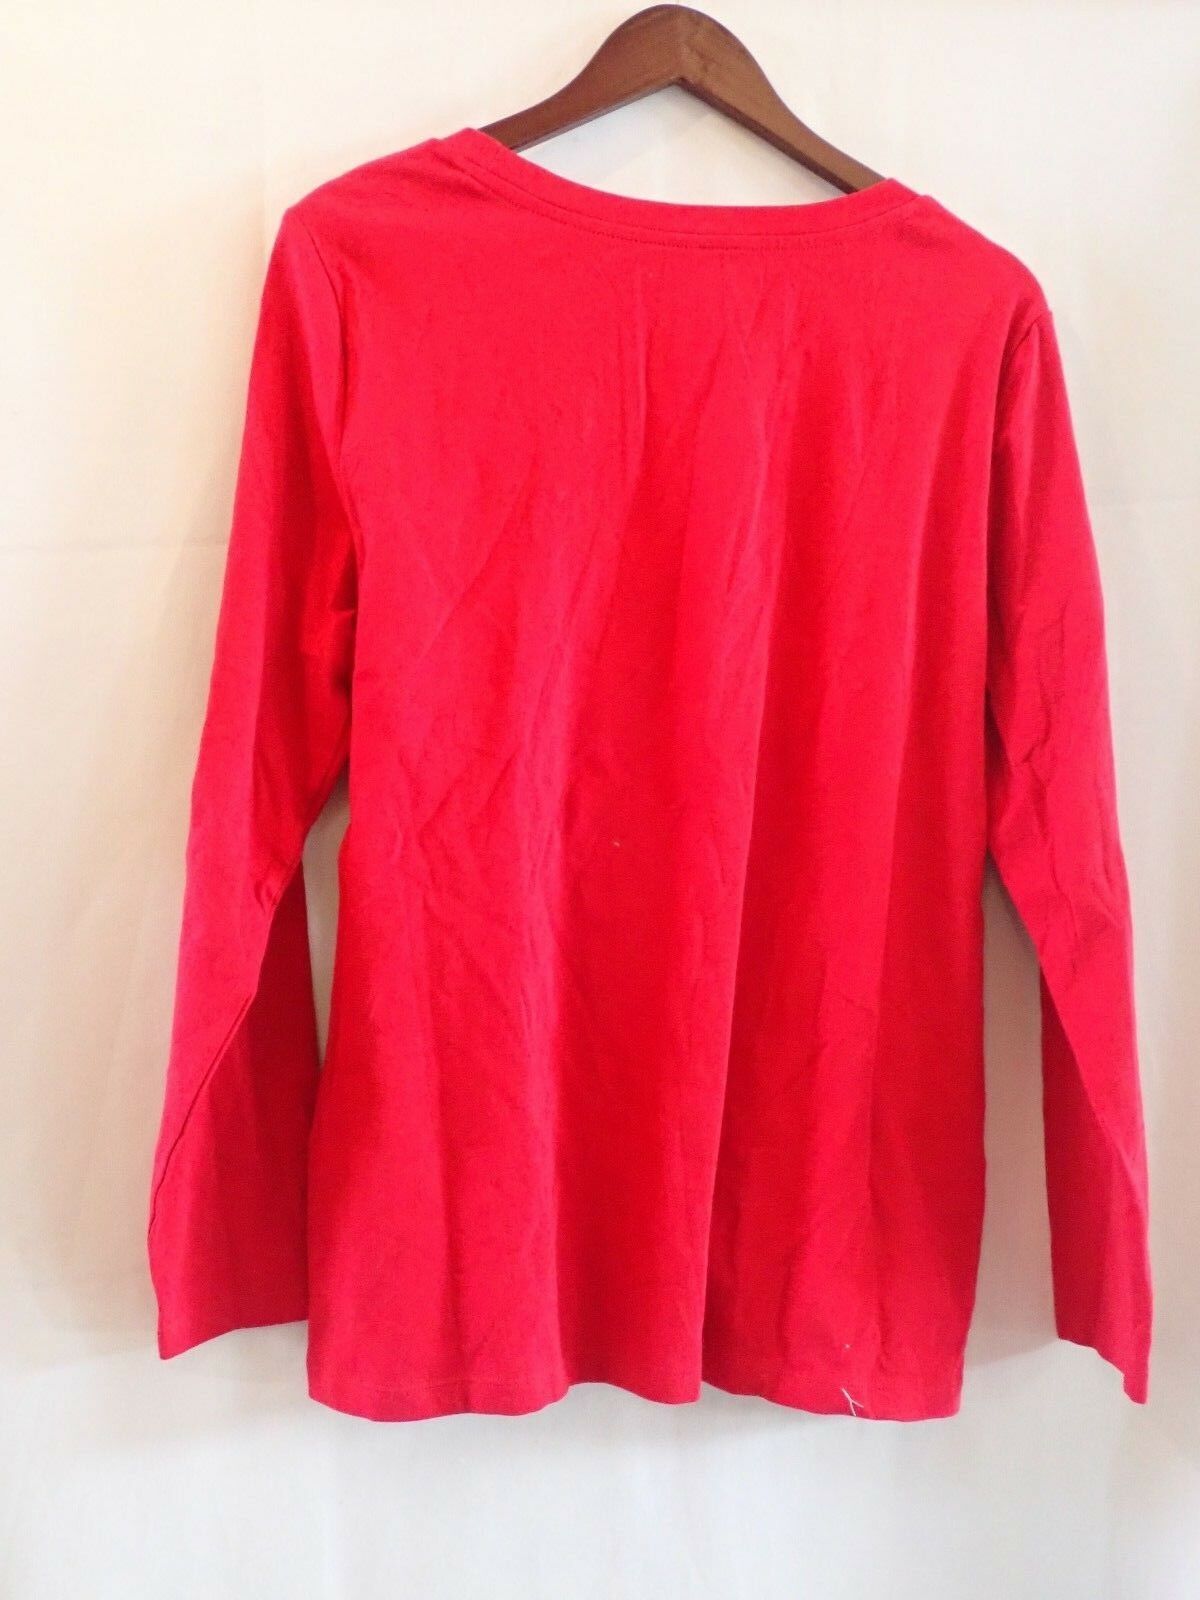 Style & Co Women's Red Crew Neck sweater Size XL (580) - Sweaters